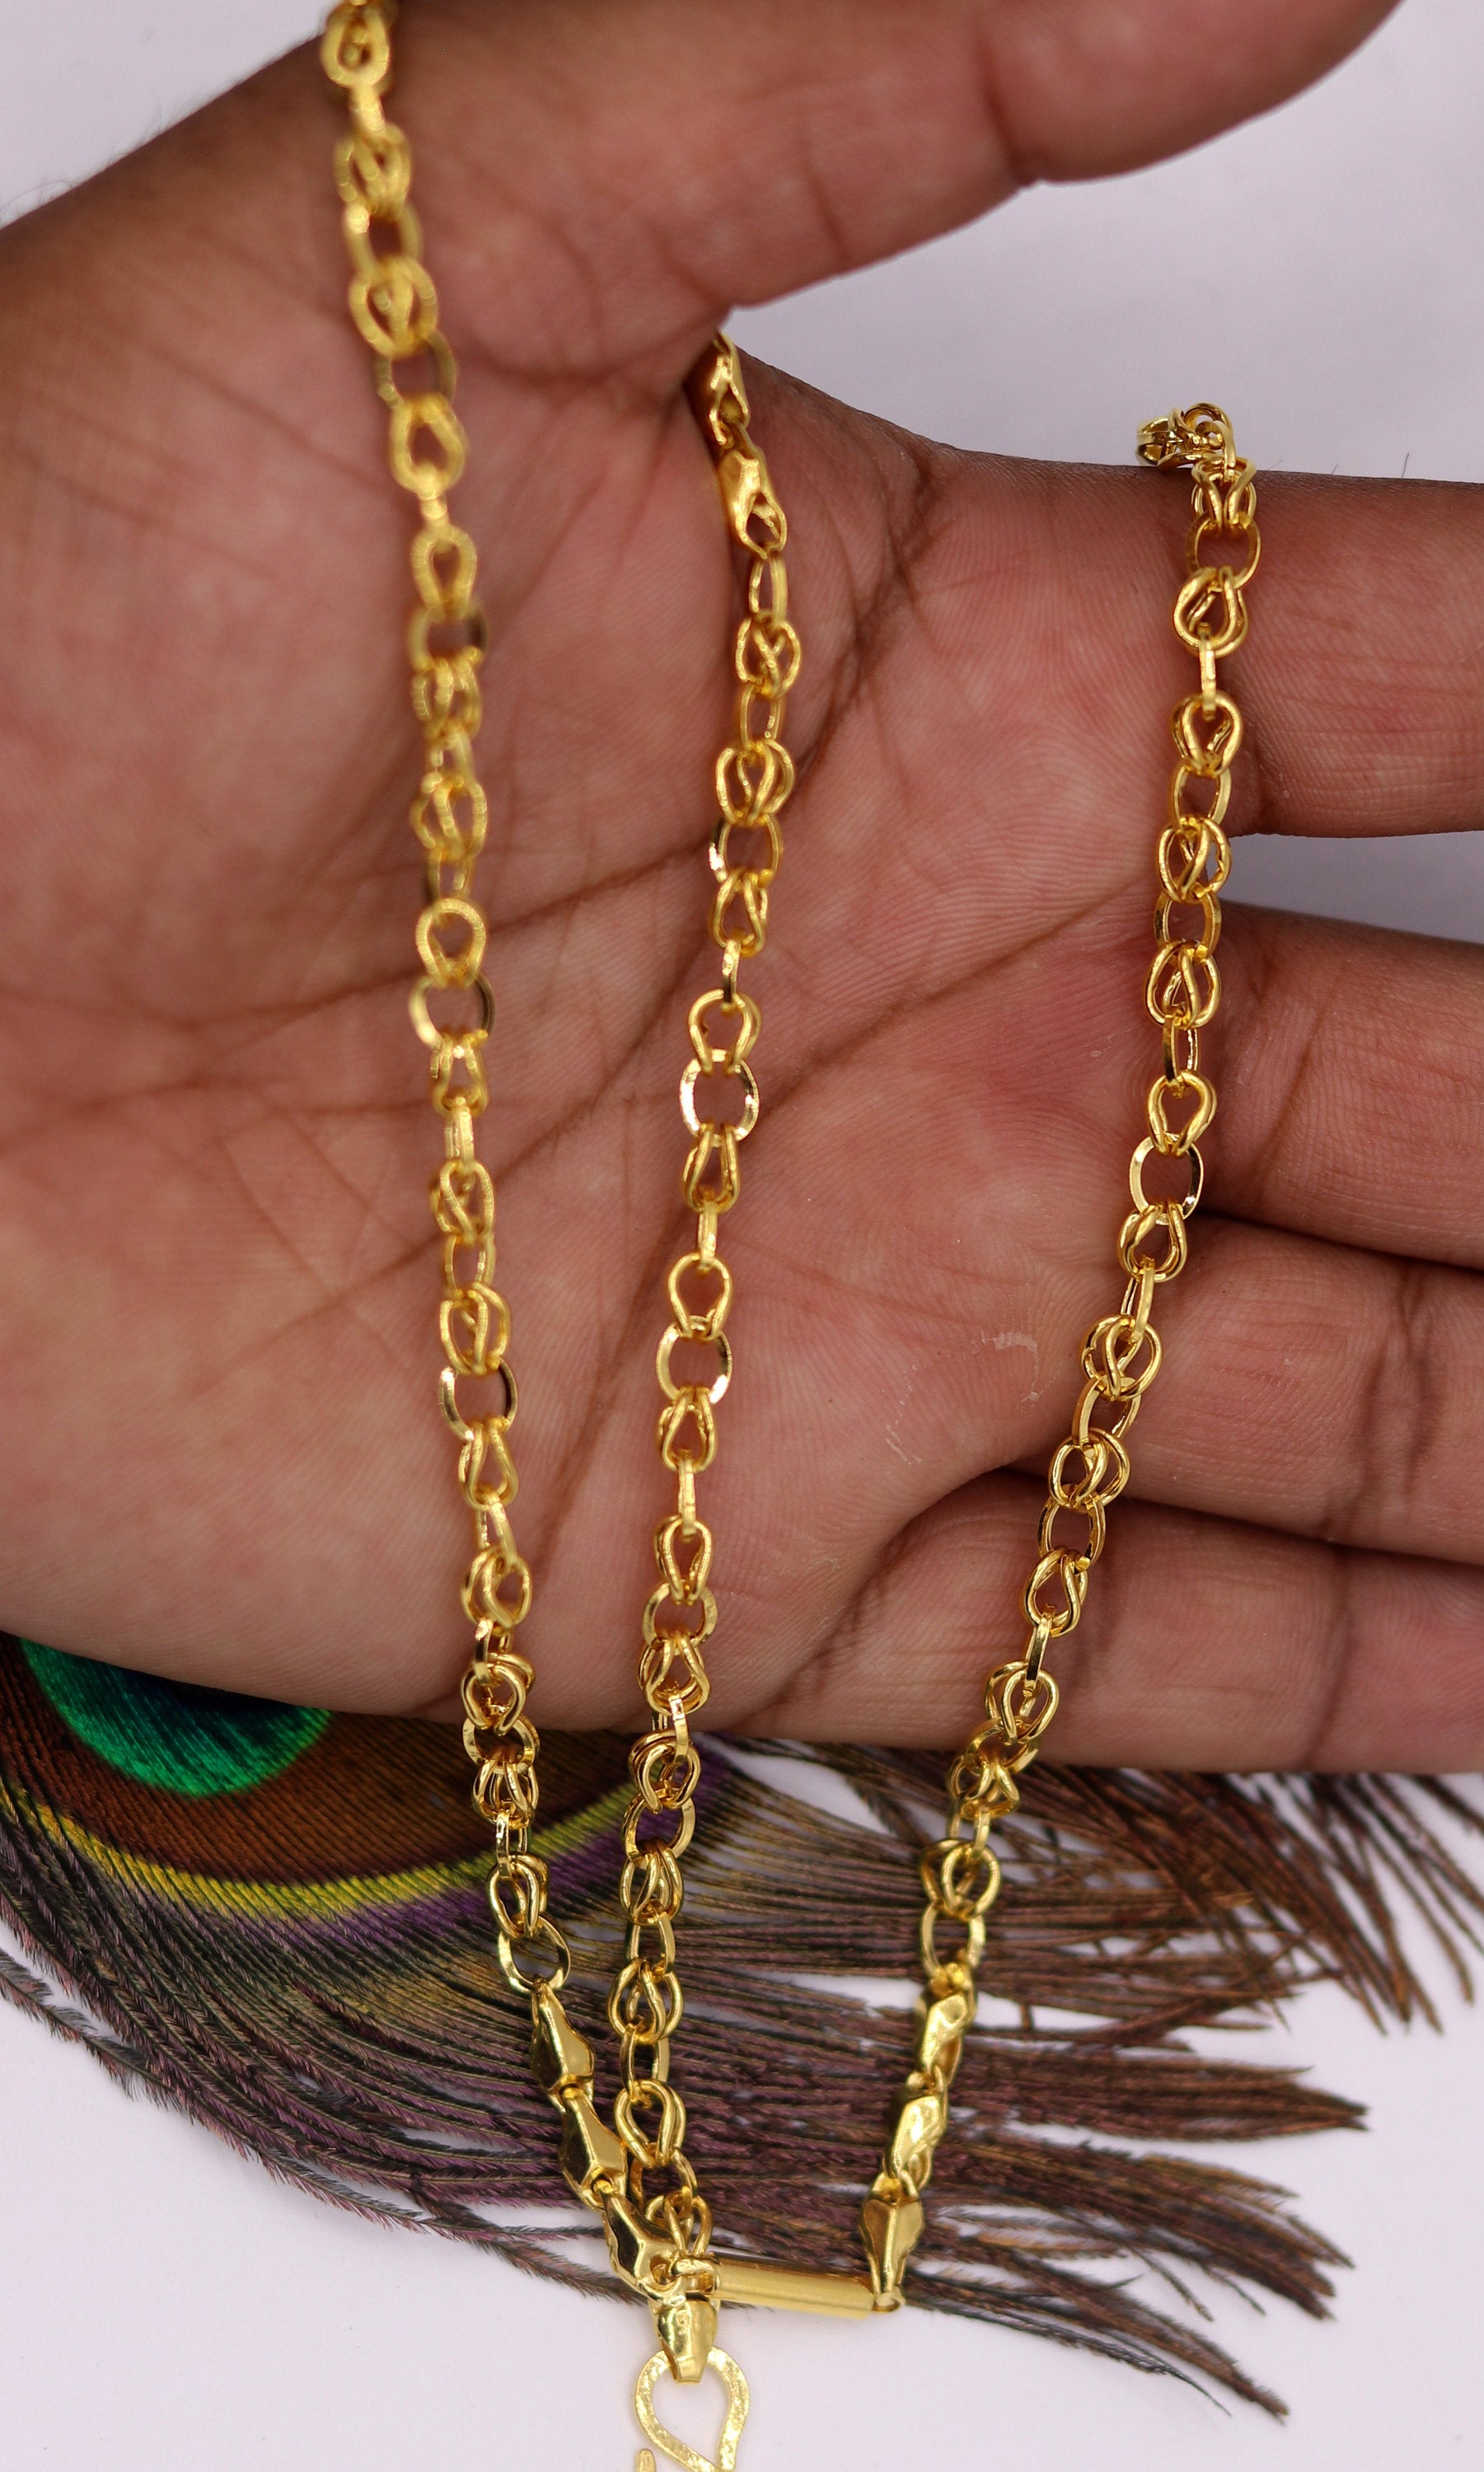 Vintage design handmade 22kt yellow gold fabulous link chain unisex gifting necklace chain with amazing design  ch187 - TRIBAL ORNAMENTS